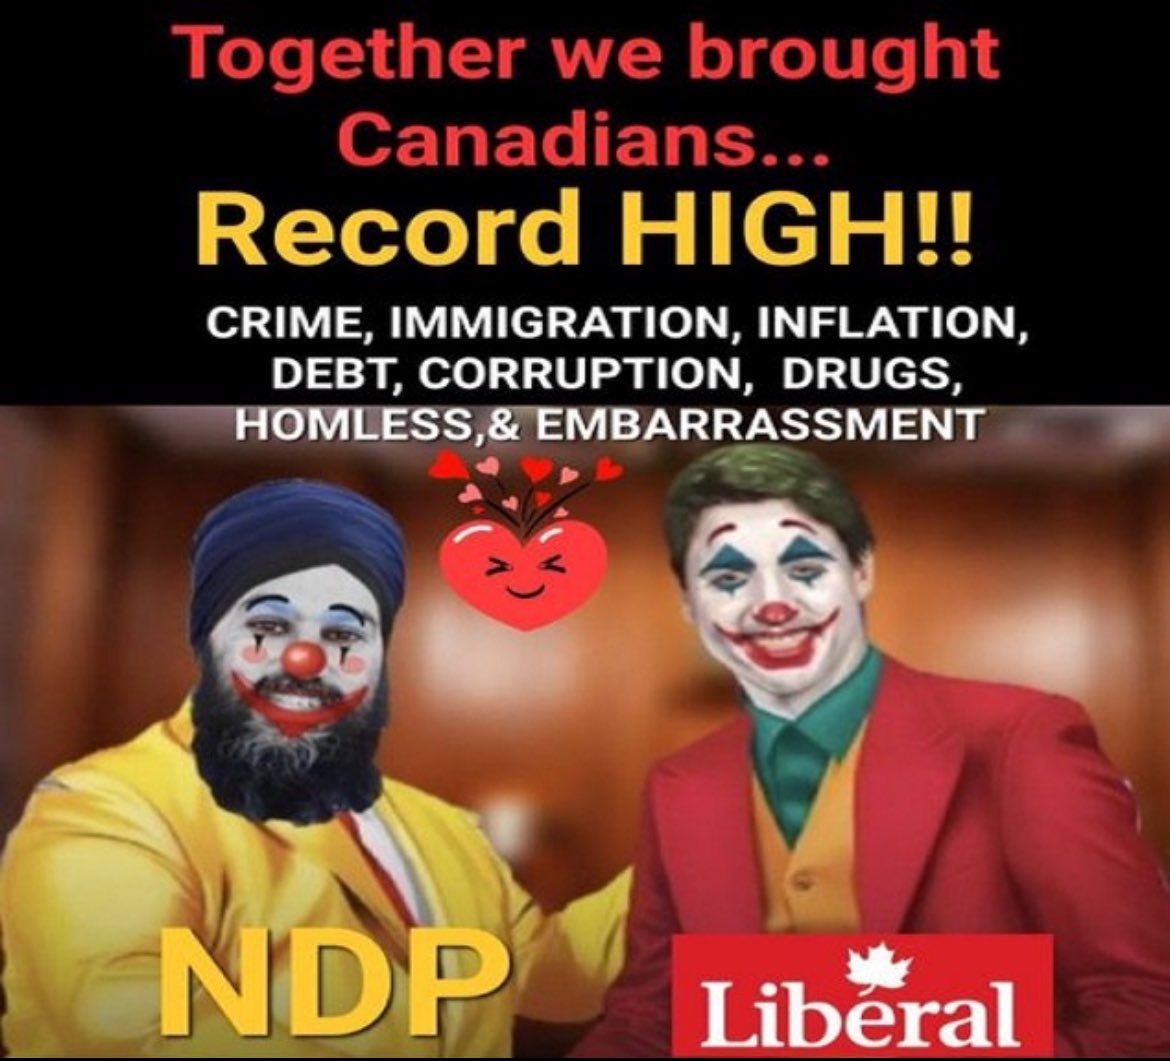 @NDP But not all Seniors , hay Jagmeet , feeling feels like a kcop out and is definitely a let down like the promised pharmaCare to keep these liberals in power , 2 classes of drugs is not that at all !